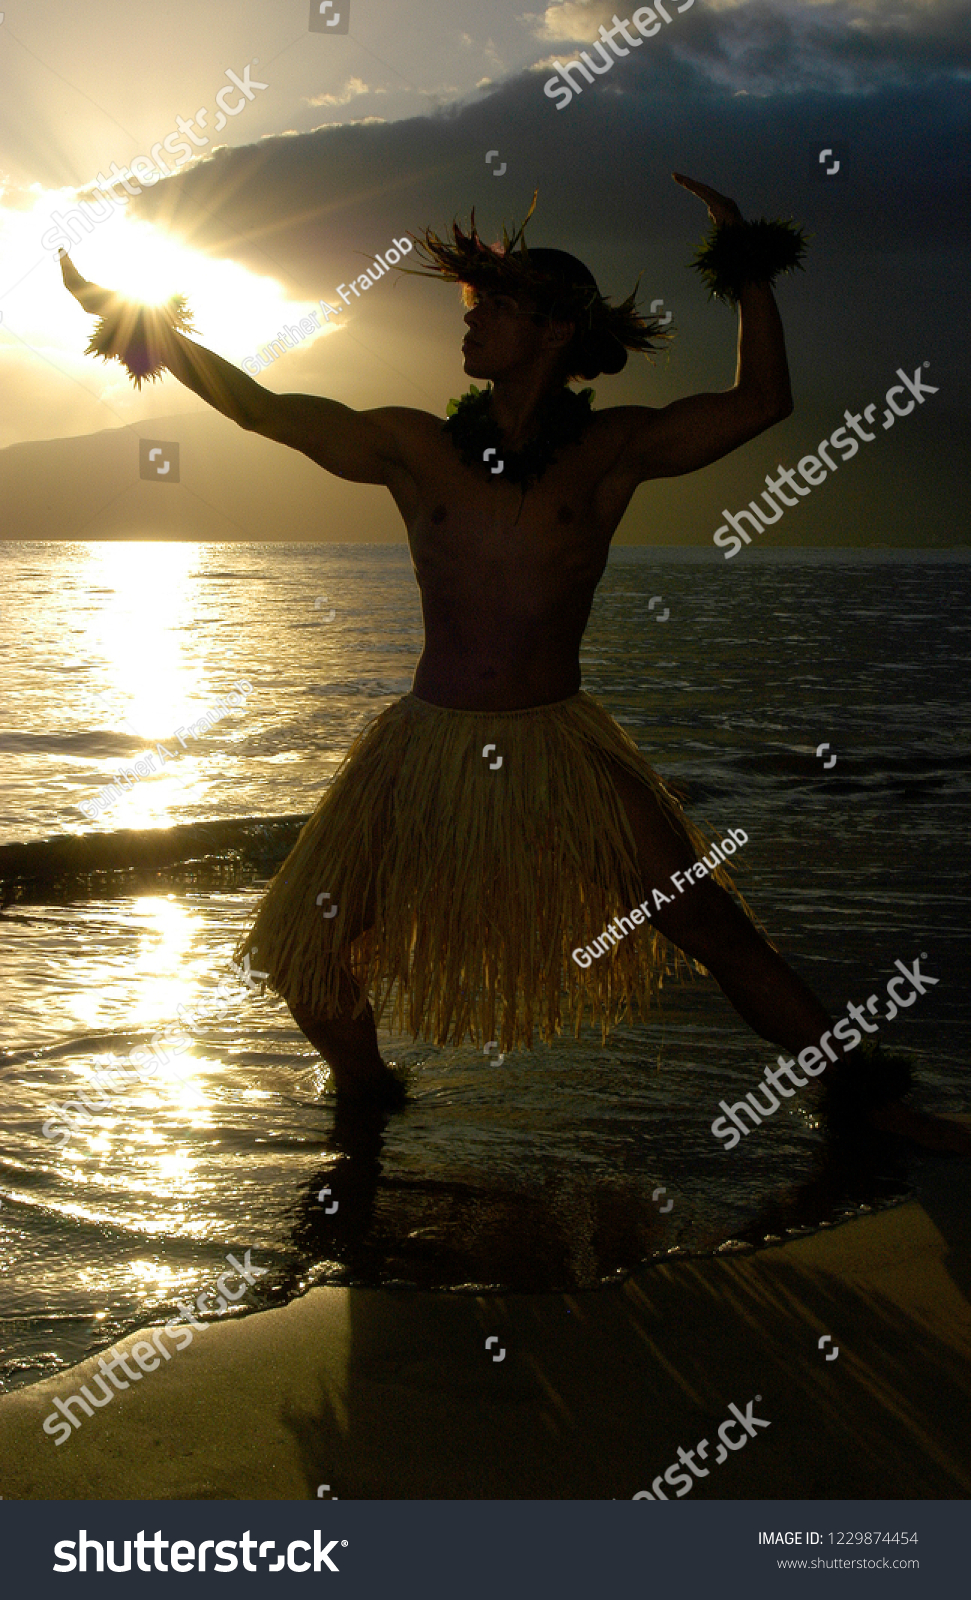 1,299 Male hula Images, Stock Photos & Vectors | Shutterstock